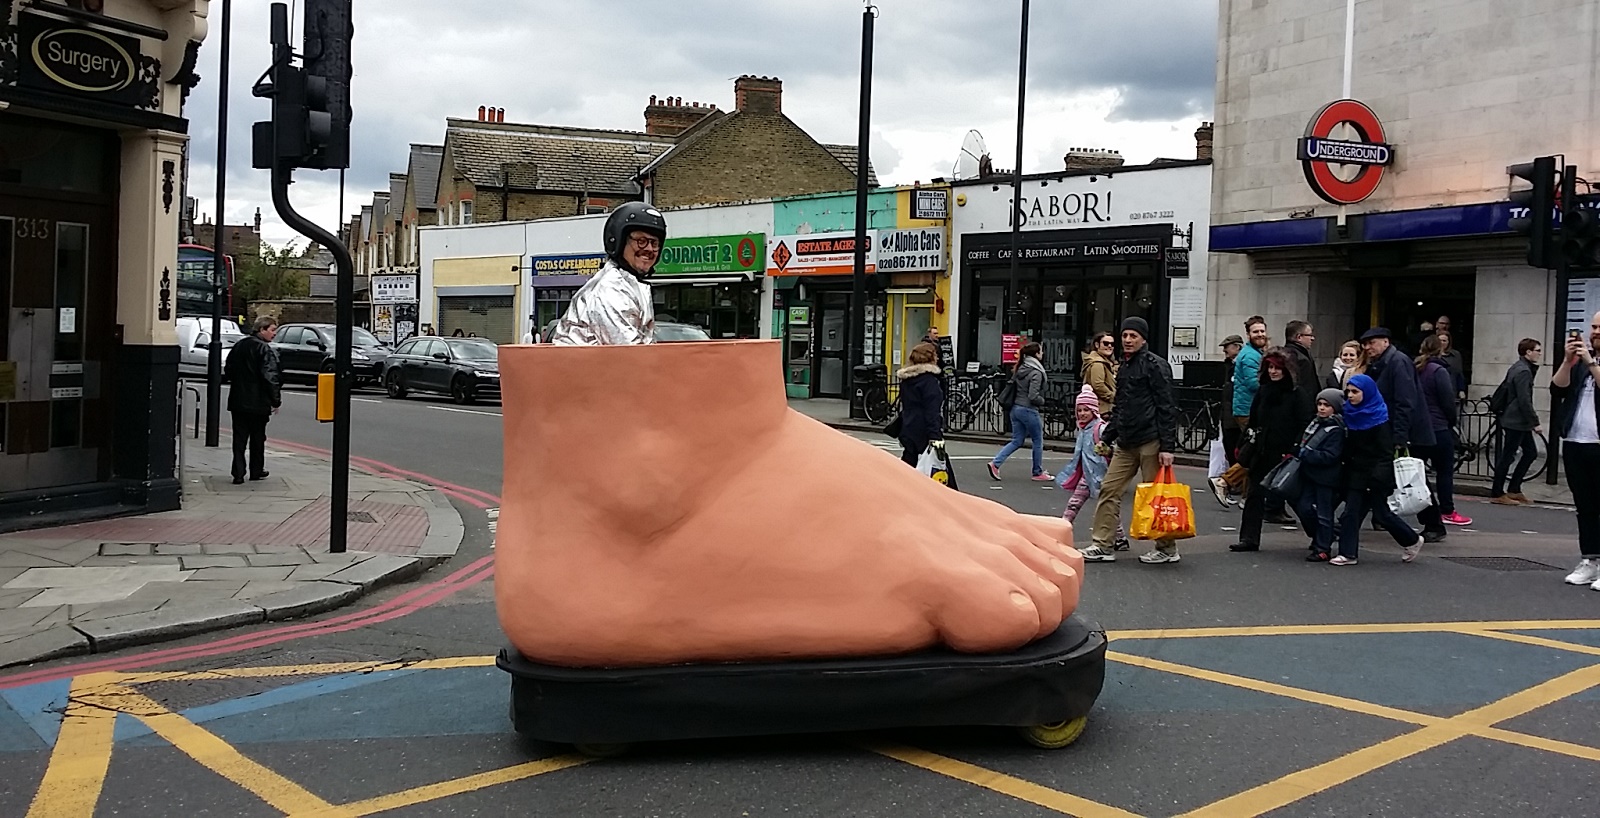 Roger of Bureau of Silly Ideas driving a foot promoting no car days in Lambeth